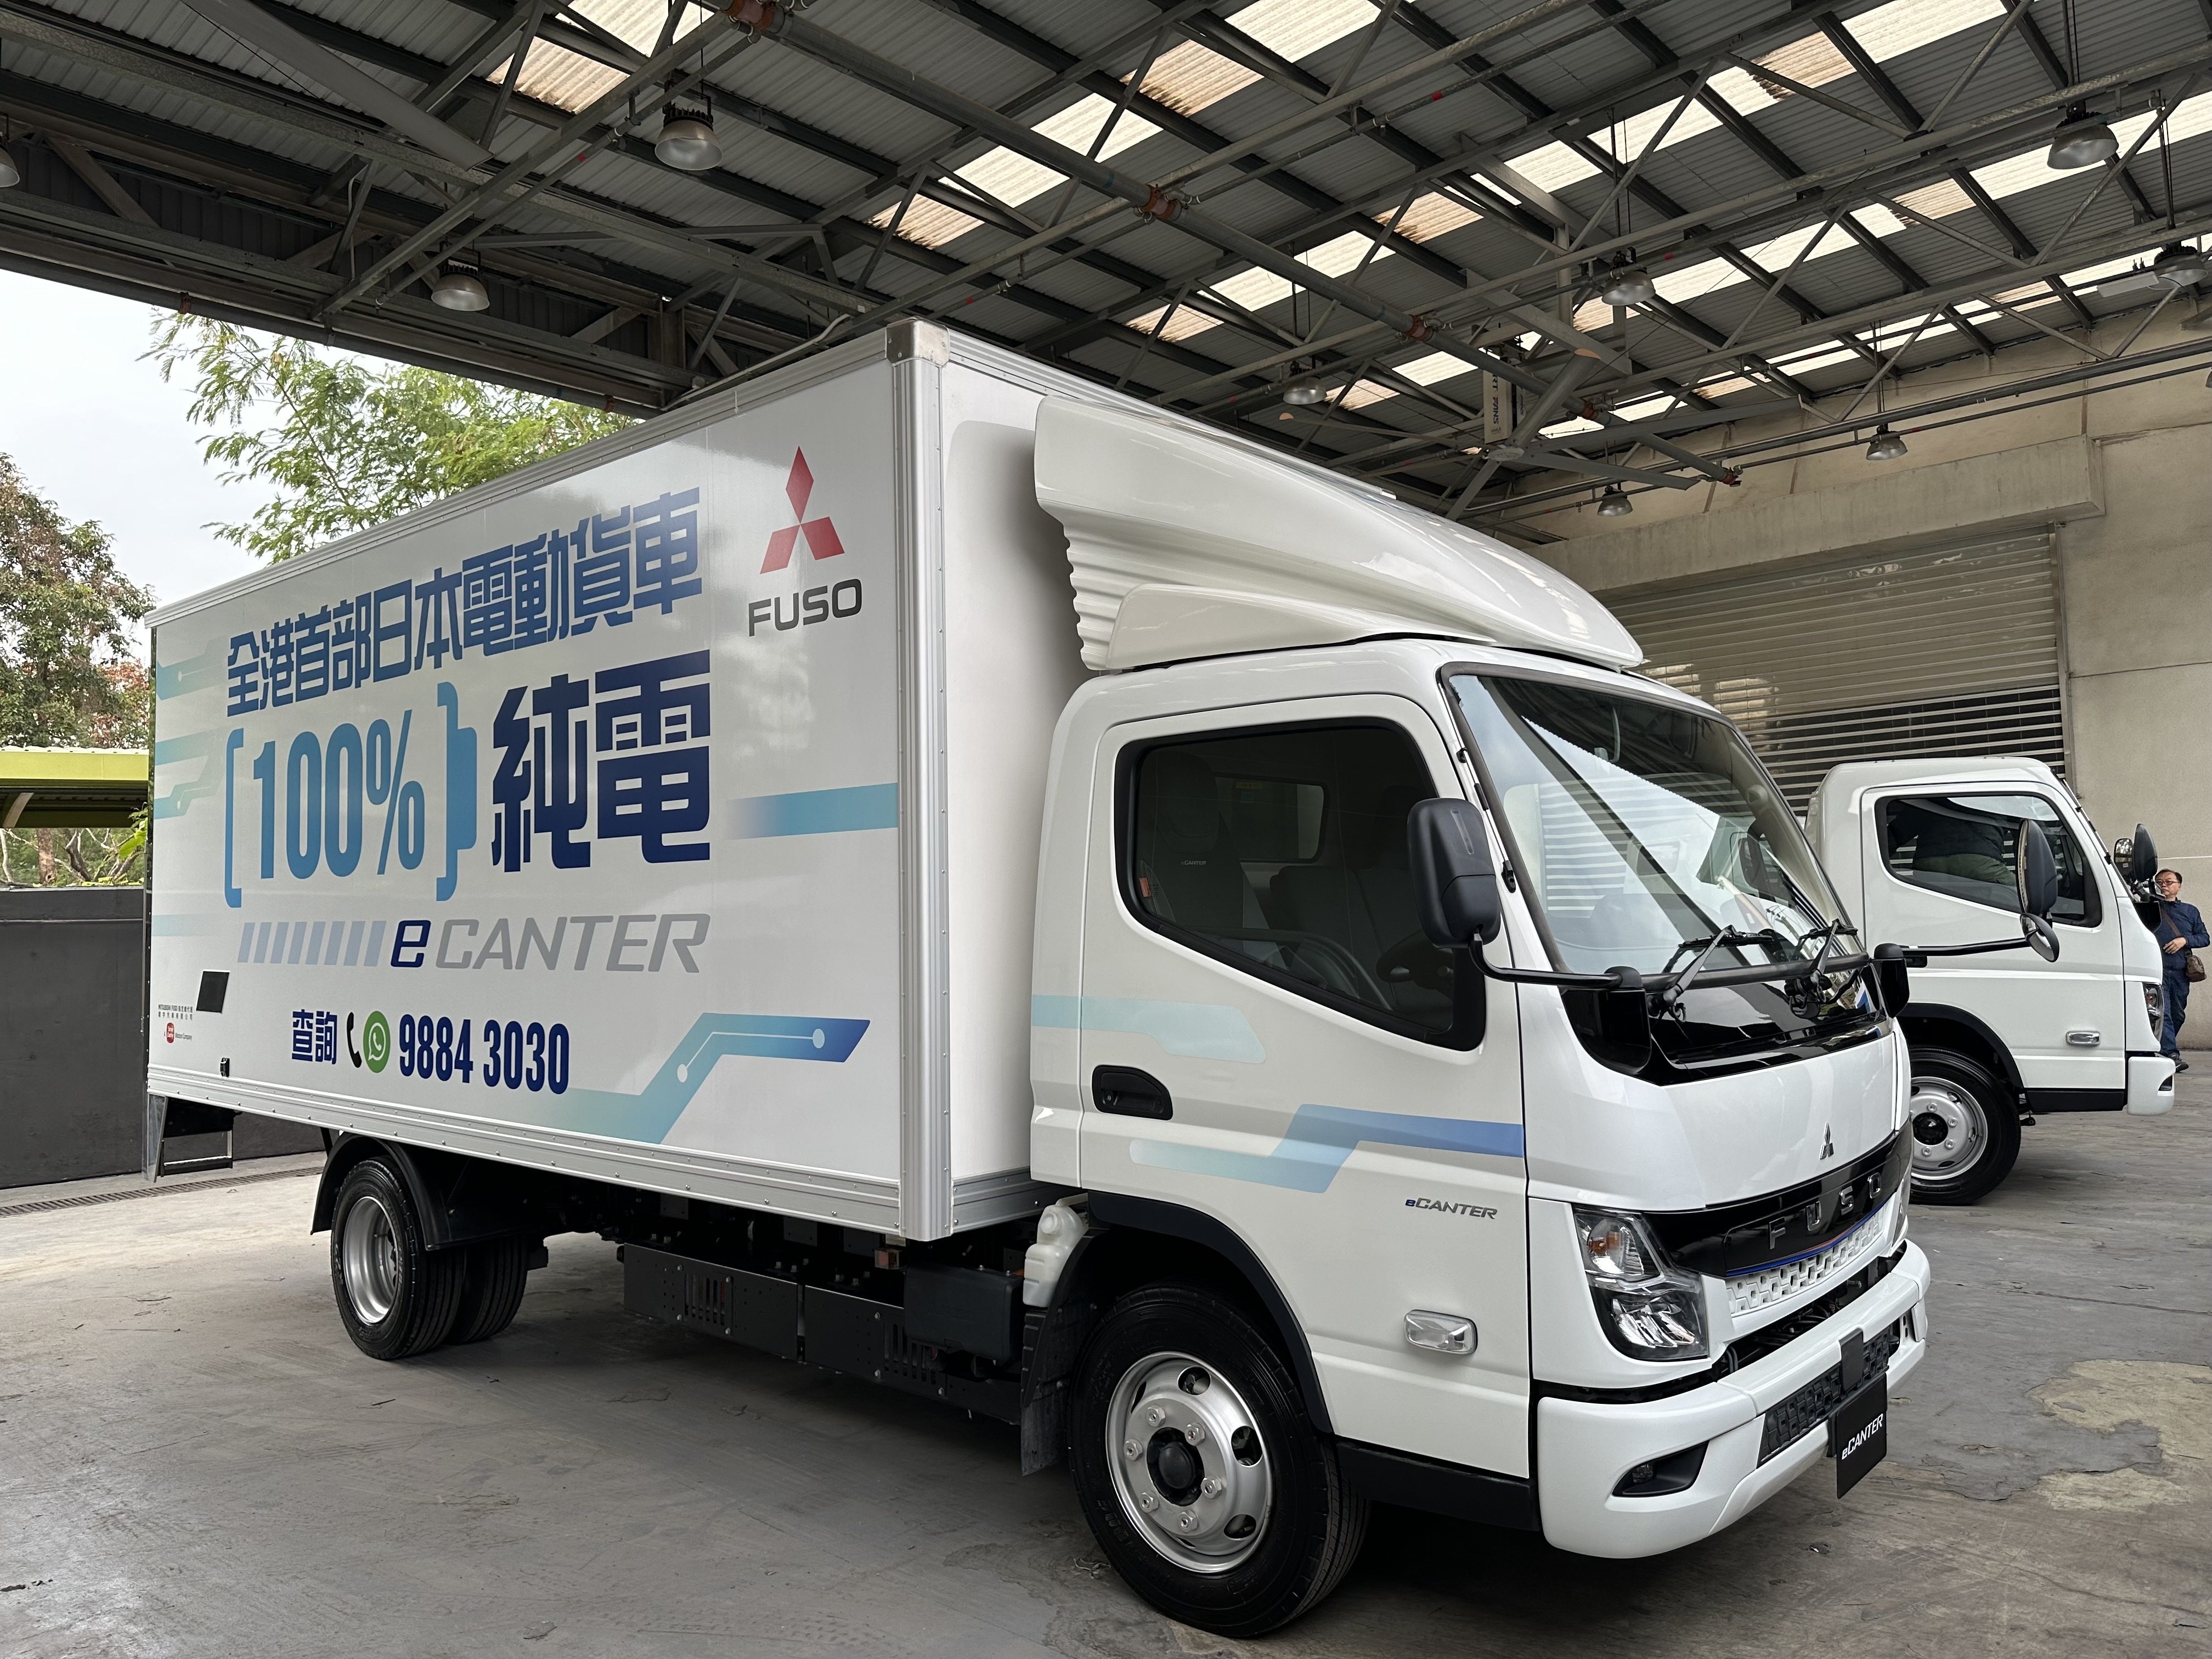 Mitsubishi Fuso’s new eCanter electric truck. Seven models with three battery capacities and six wheelbase options will be offered in the Hong Kong market. Photo: Martin Choi